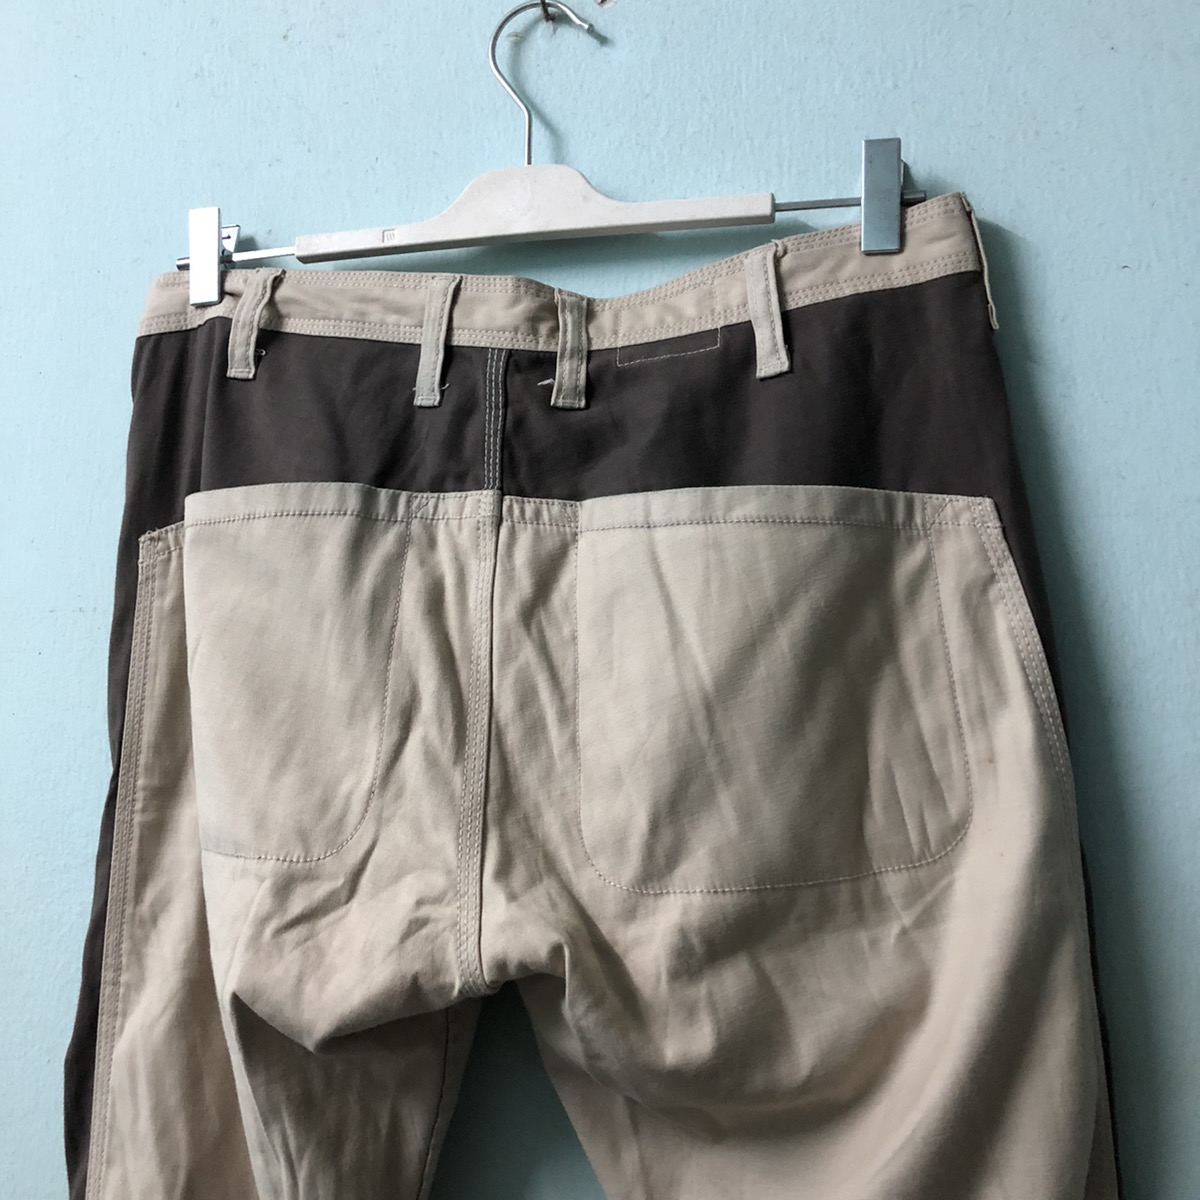 White Mountaineering side strape pants - 11